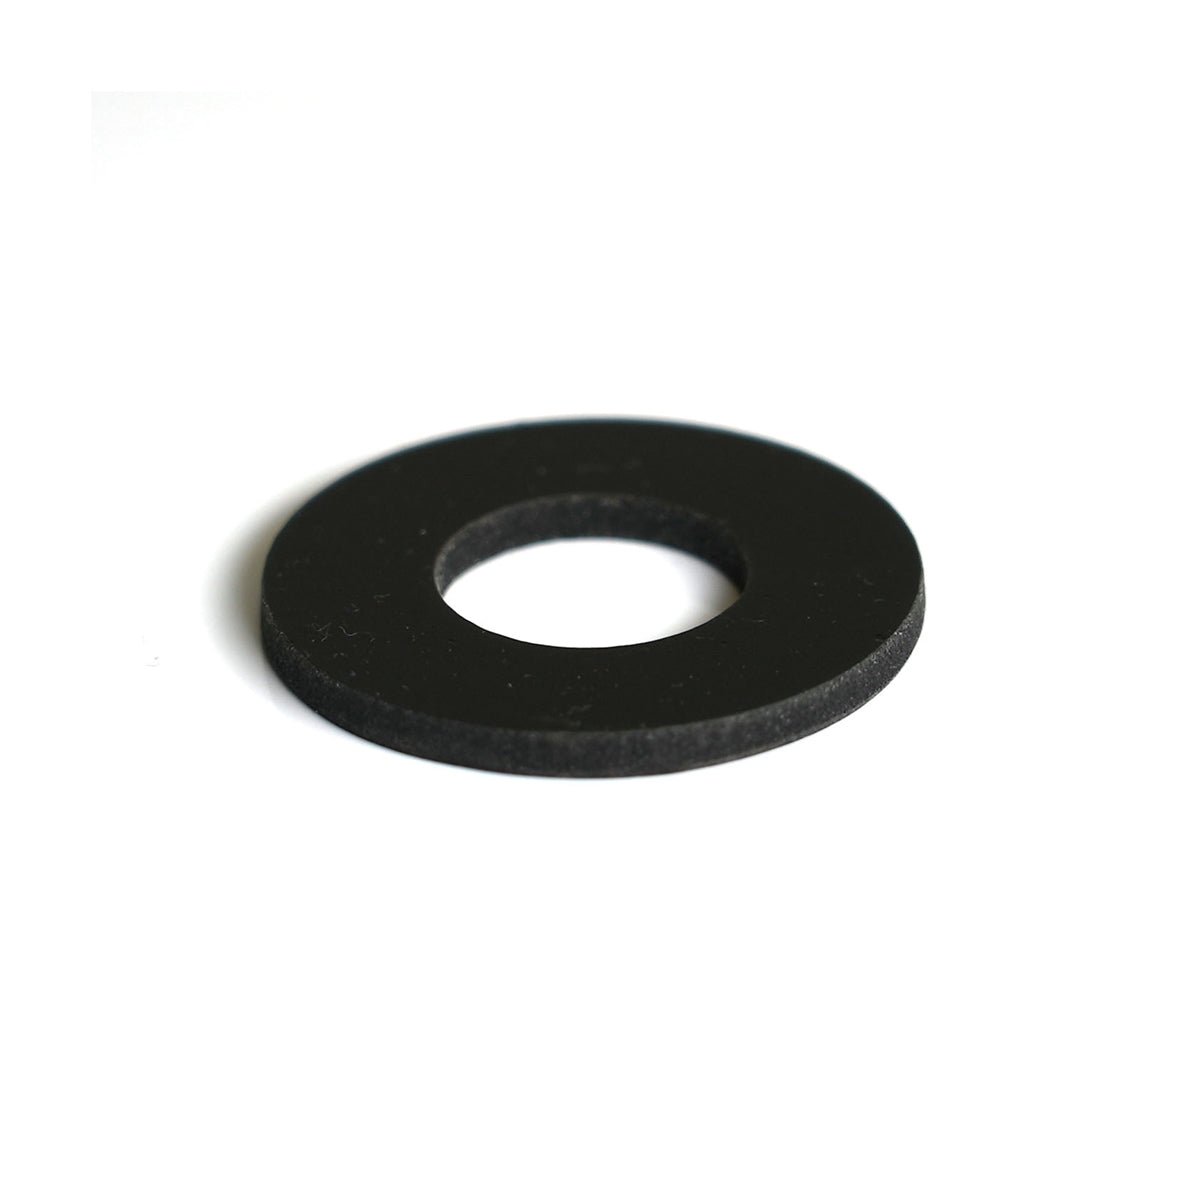 Alaska Gear Company Approved OEM Replacement Maule Oleo Shock Washer - ABI-4008F-15